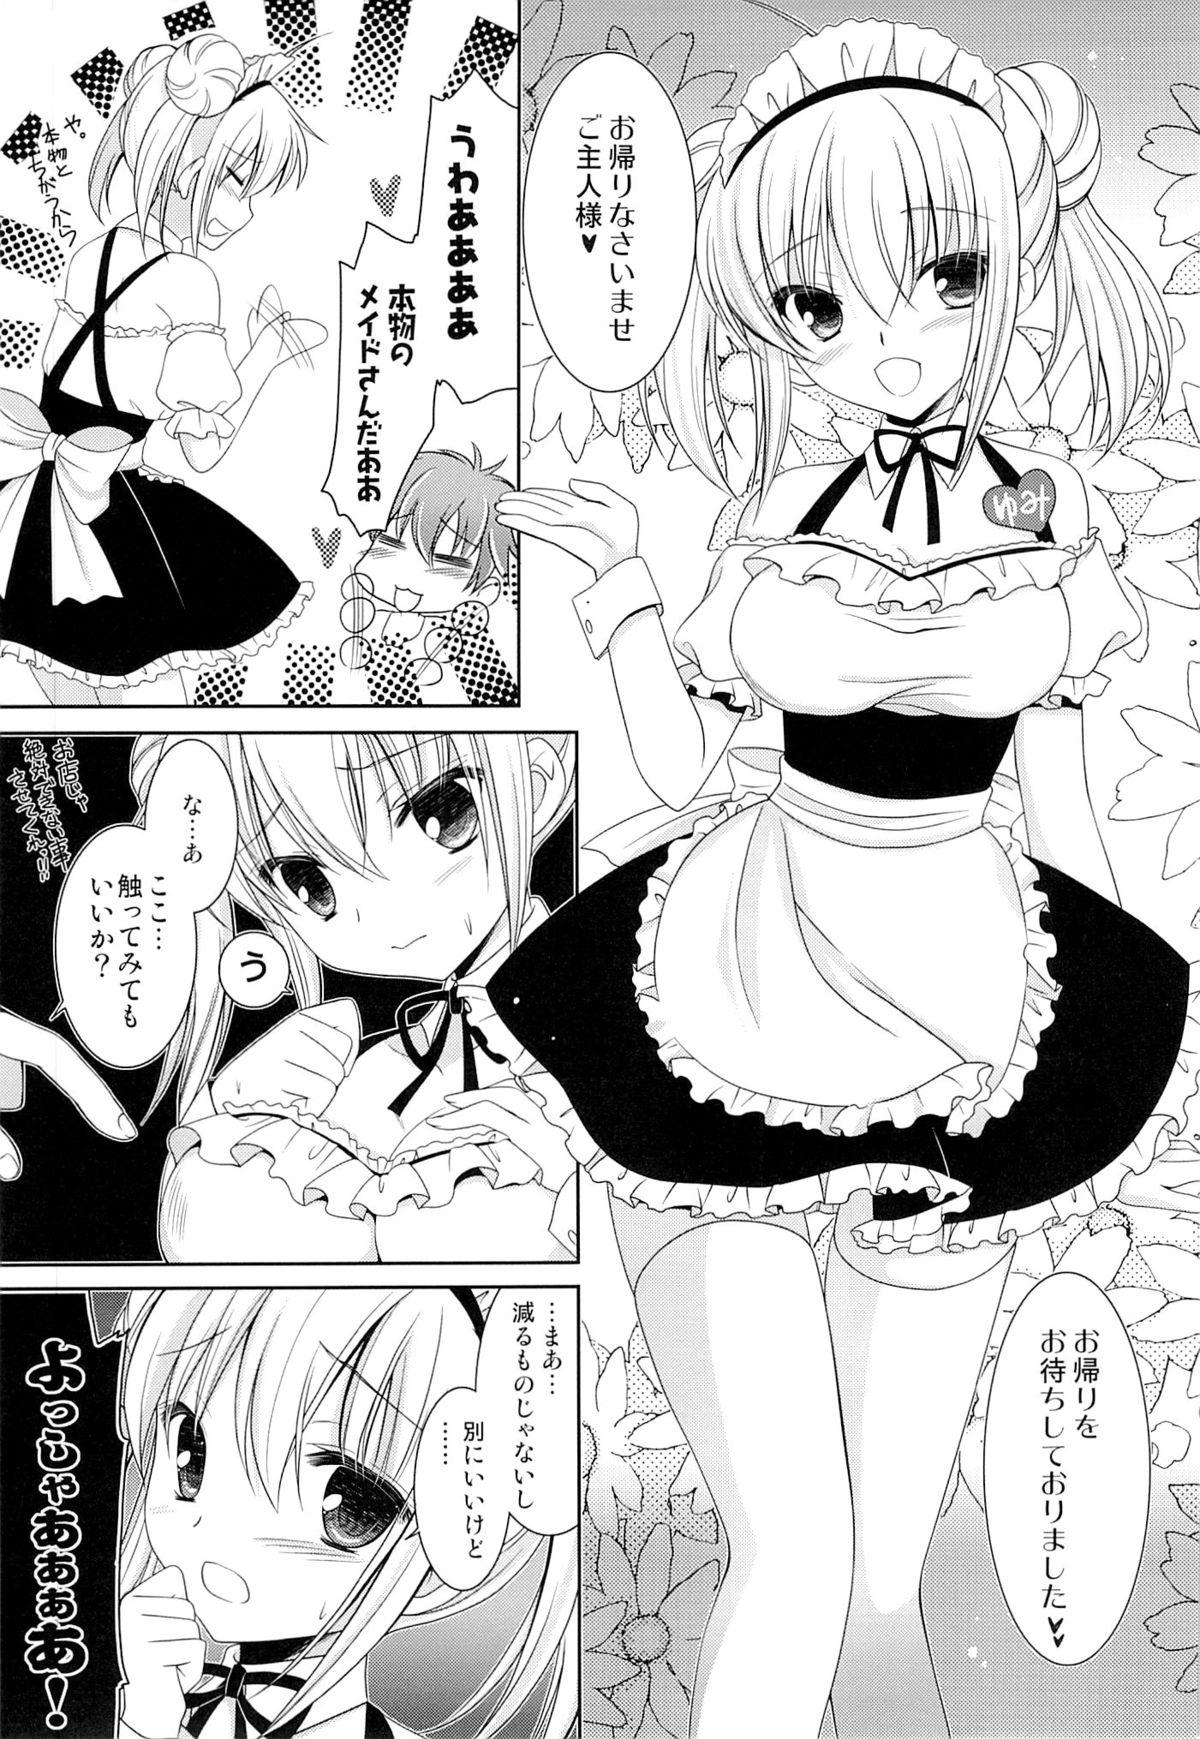 Perfect Butt Imouto Maid Str8 - Page 6